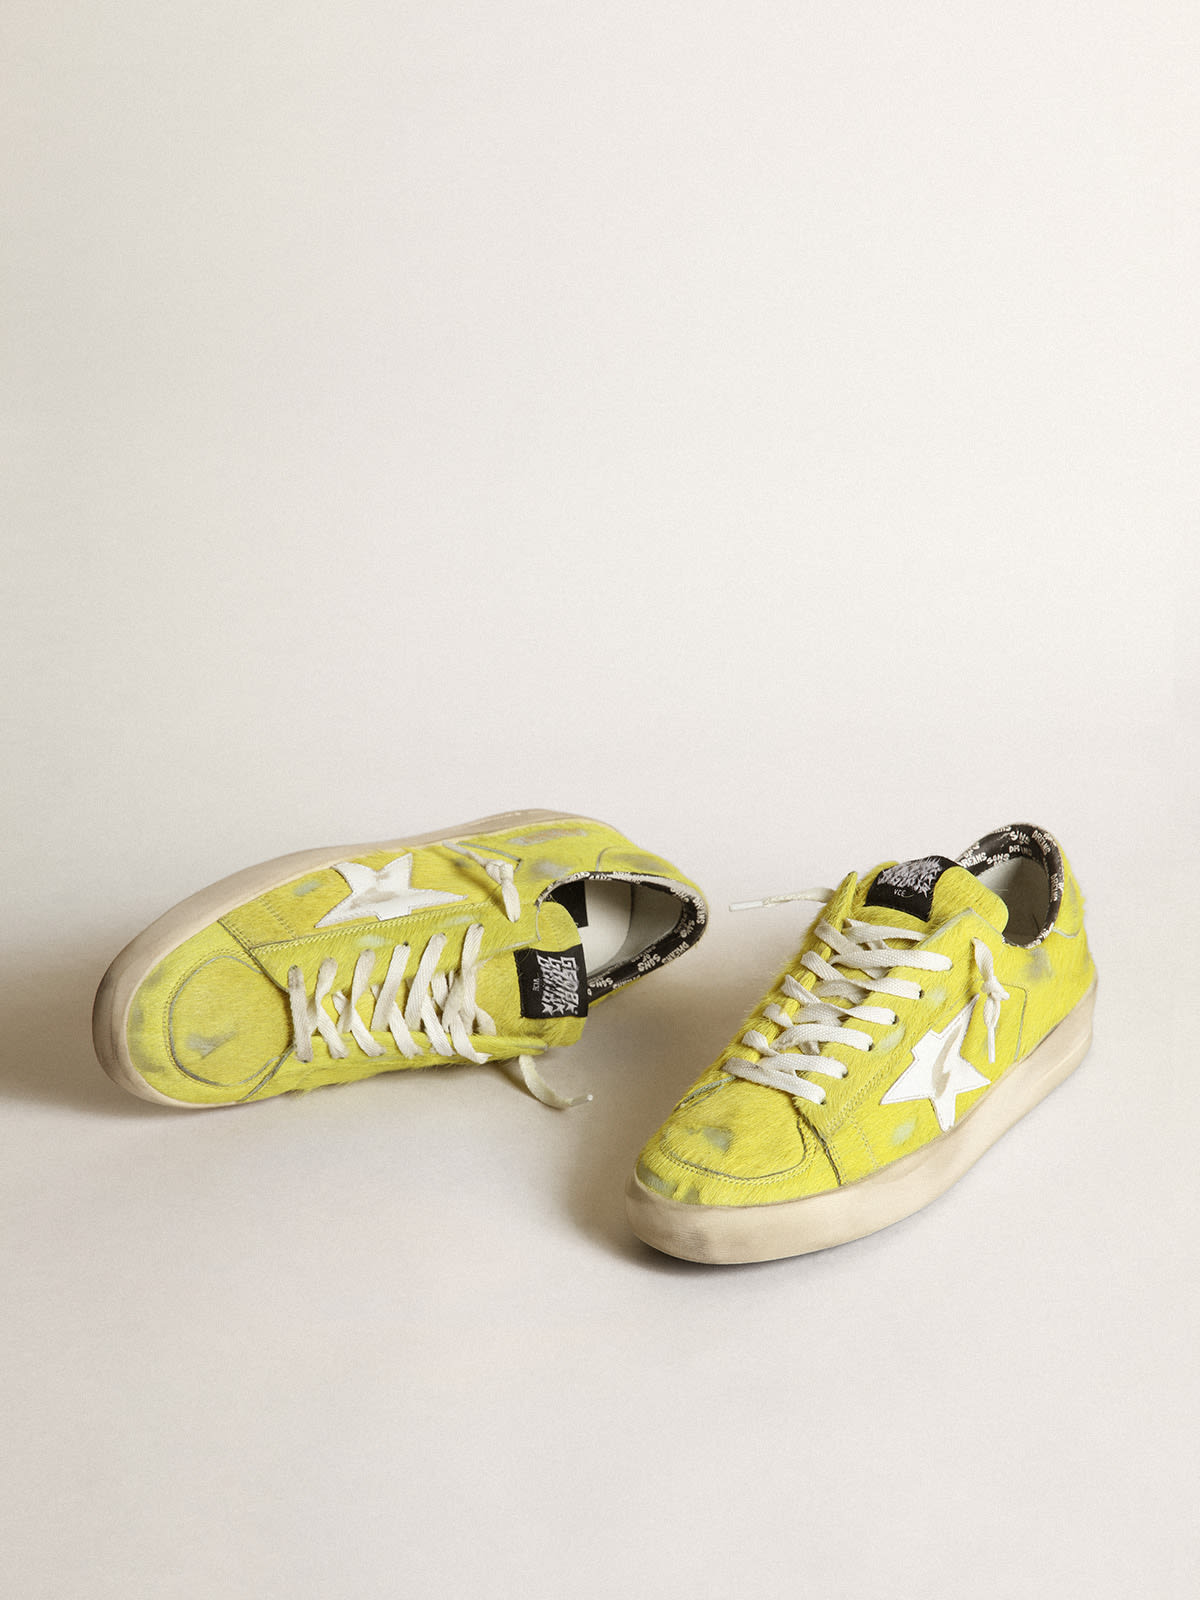 Golden Goose - Men’s Stardan sneakers in fluorescent yellow pony skin with white leather star in 